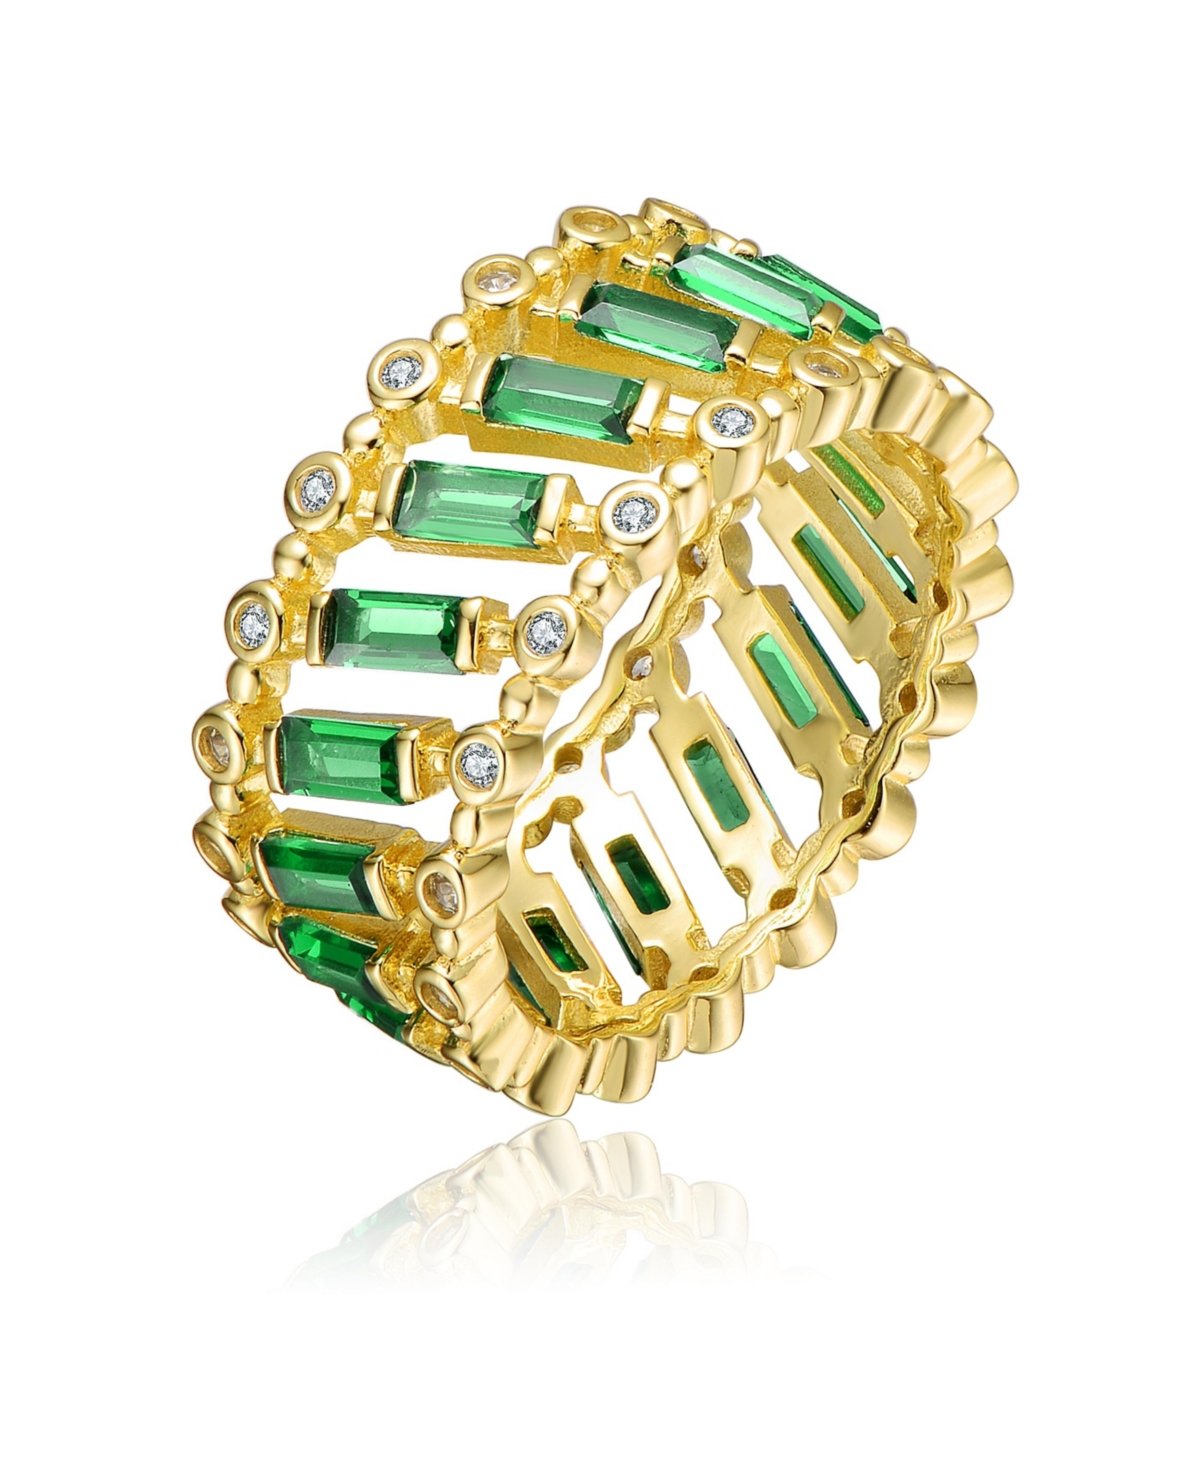 GENEVIVE STERLING SILVER 14K YELLOW GOLD PLATED WITH EMERALD & BAGUETTE ETERNITY BAND RING